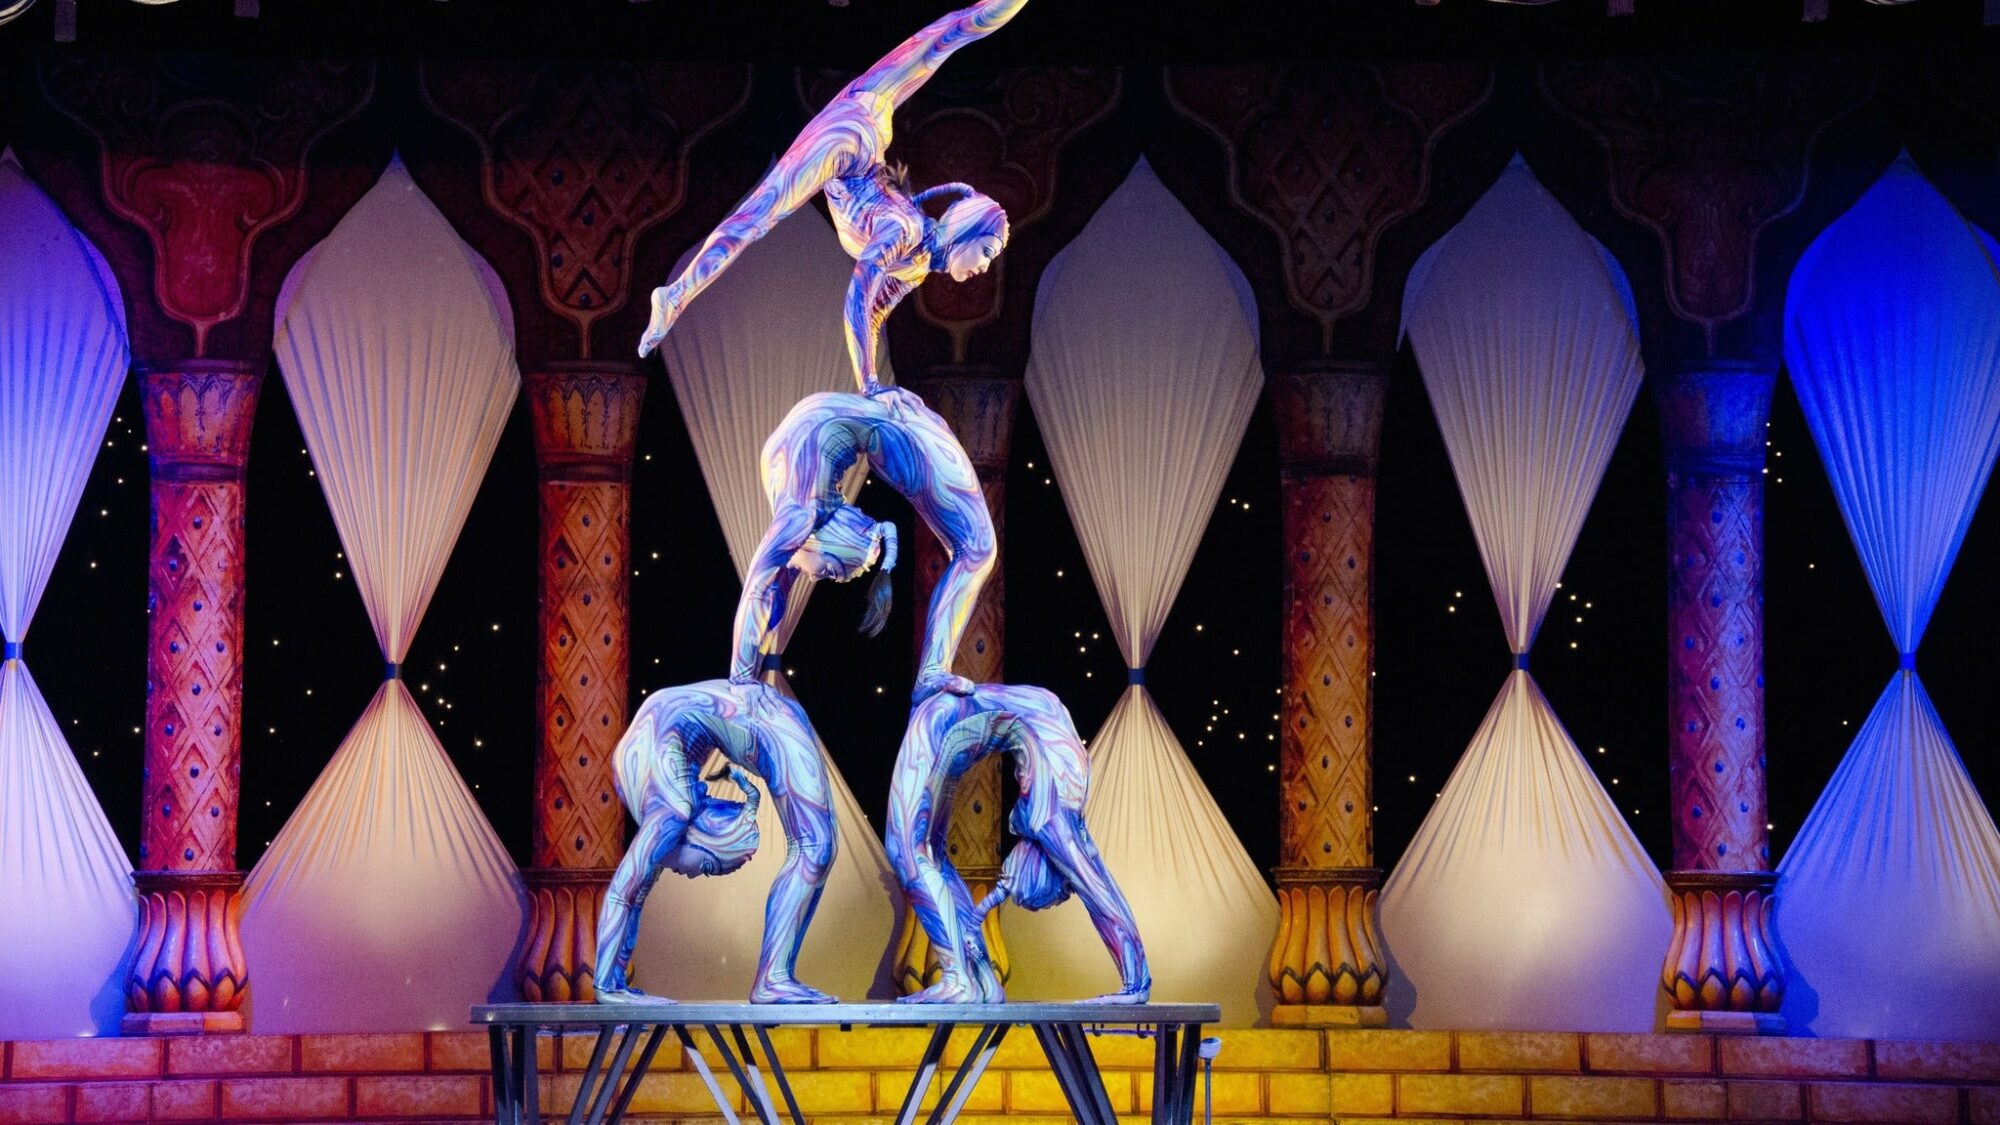 Image name Cirque the Greatest Show at Scarborough Spa Grand Hall Scarborough the 2 image from the post Cirque: The Greatest Show- Matinee at Scarborough Spa Grand Hall, Scarborough in Yorkshire.com.